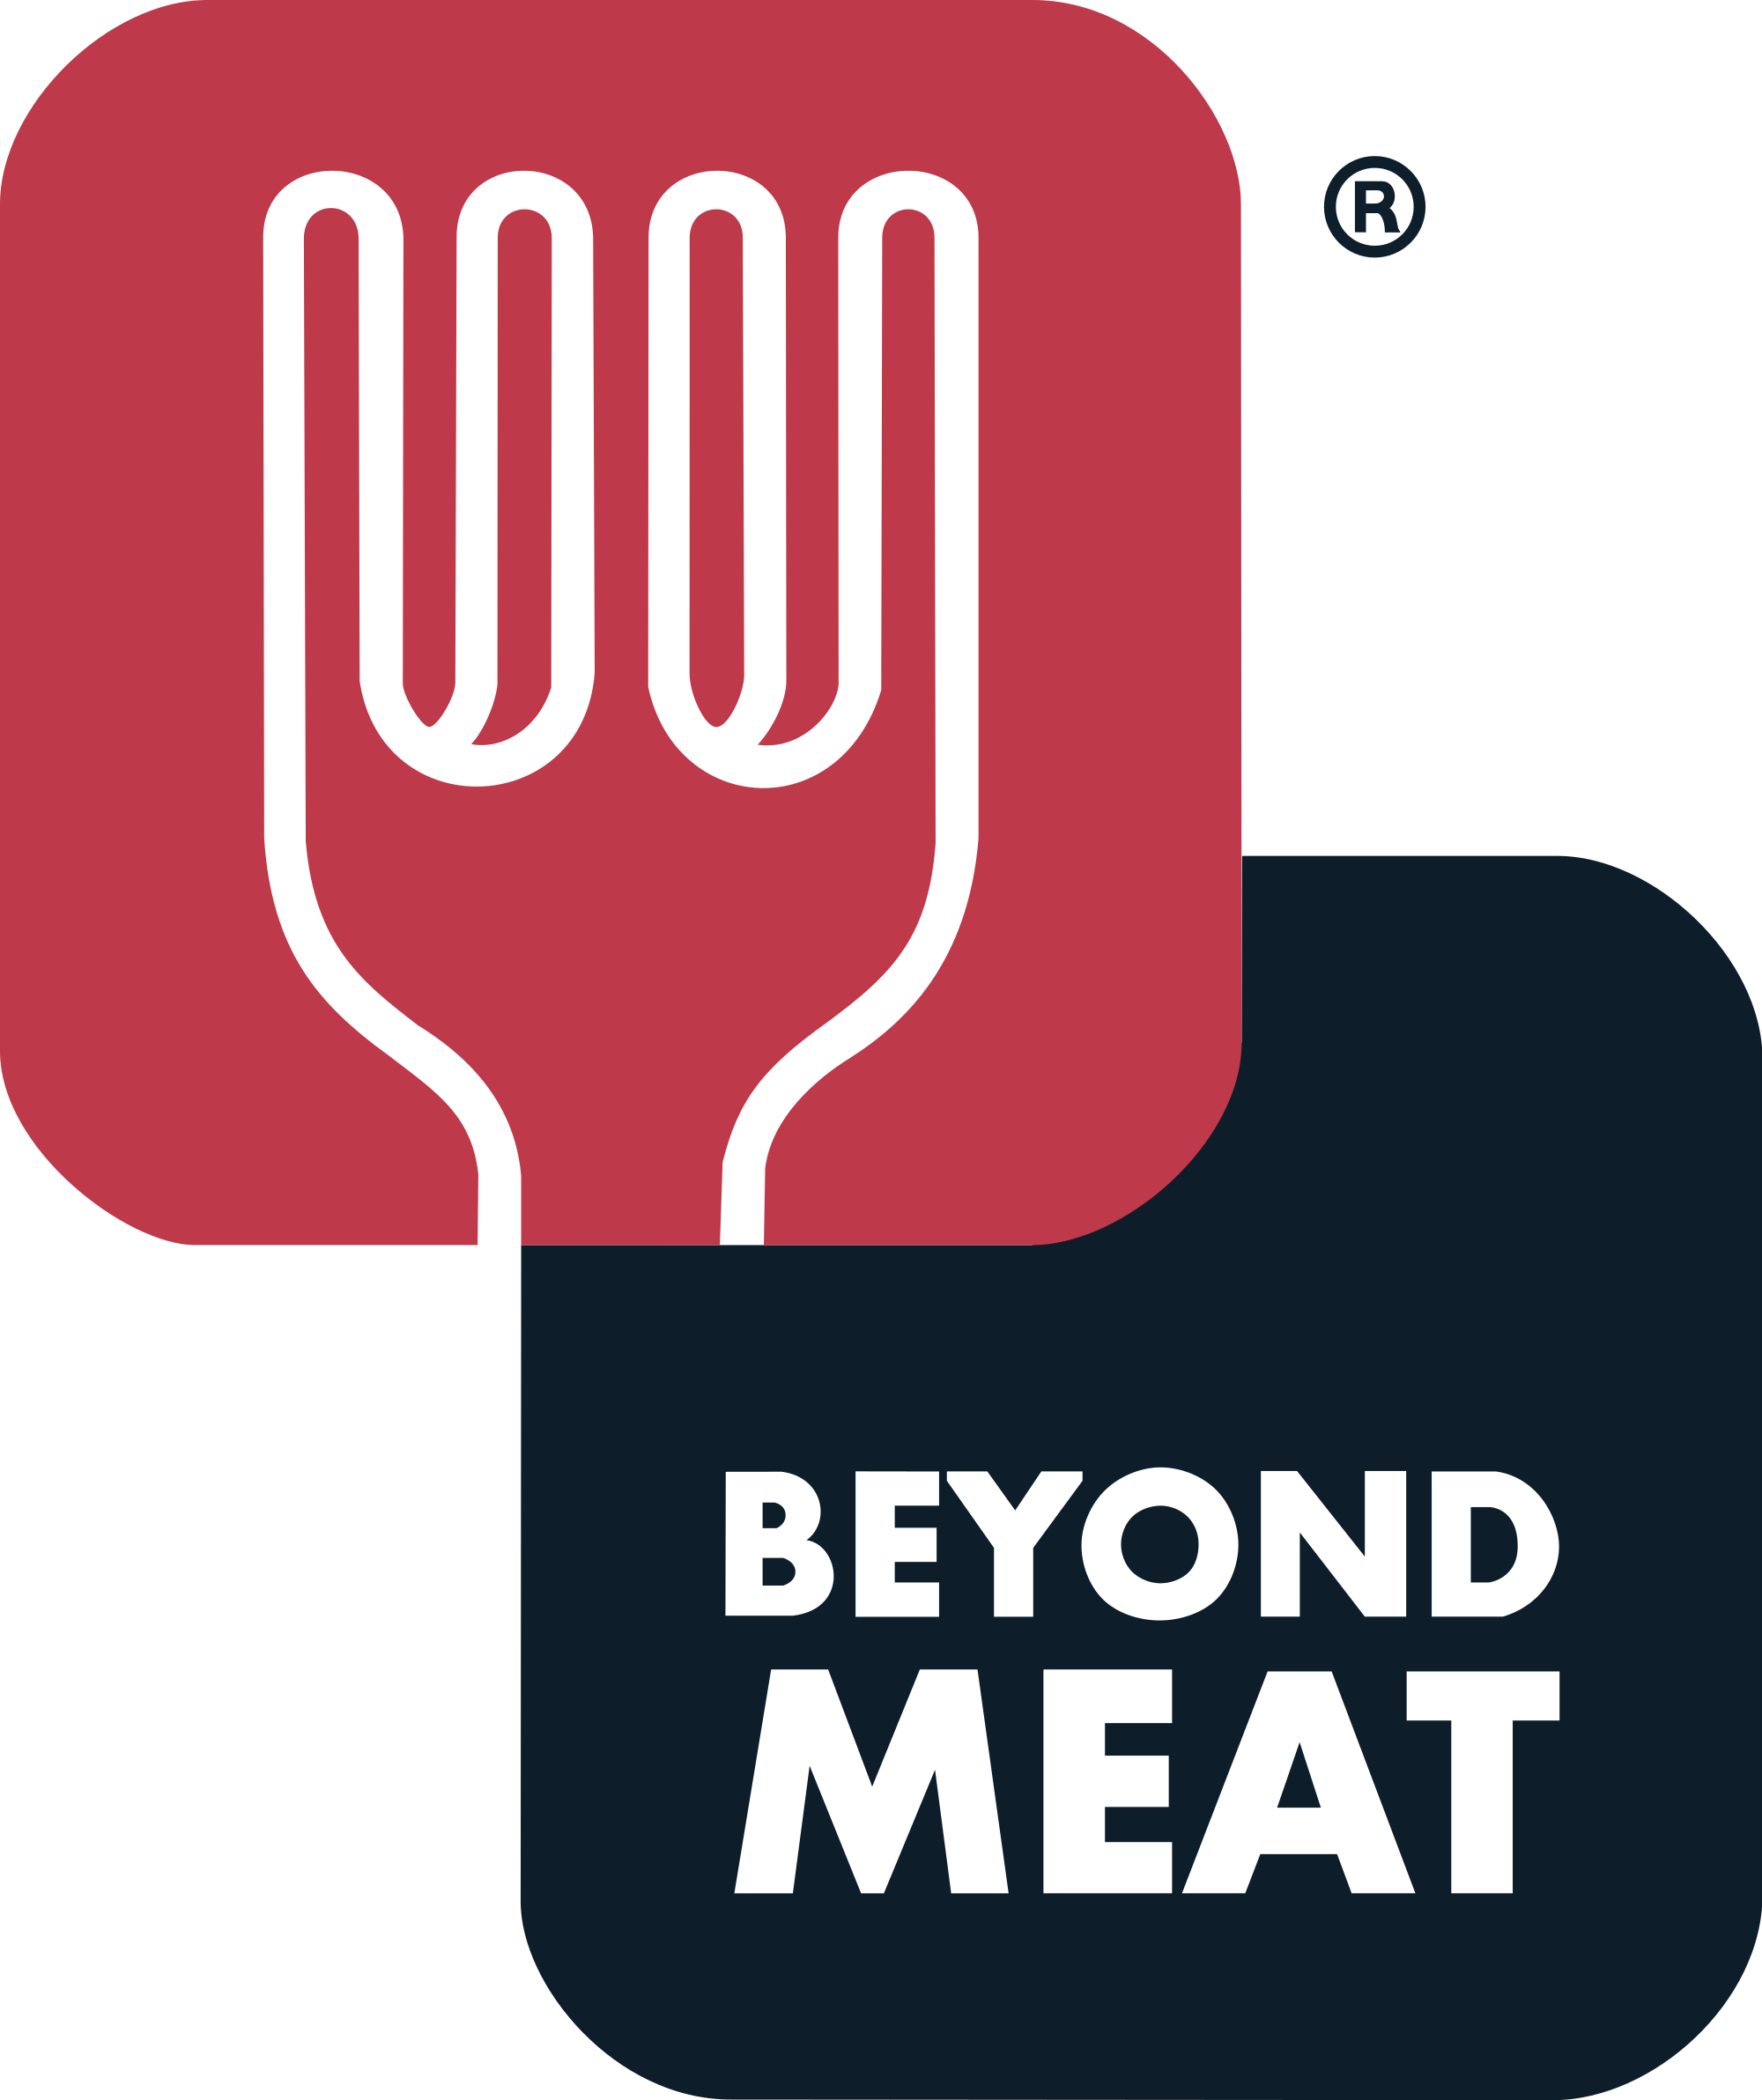 Meat svg #10, Download drawings